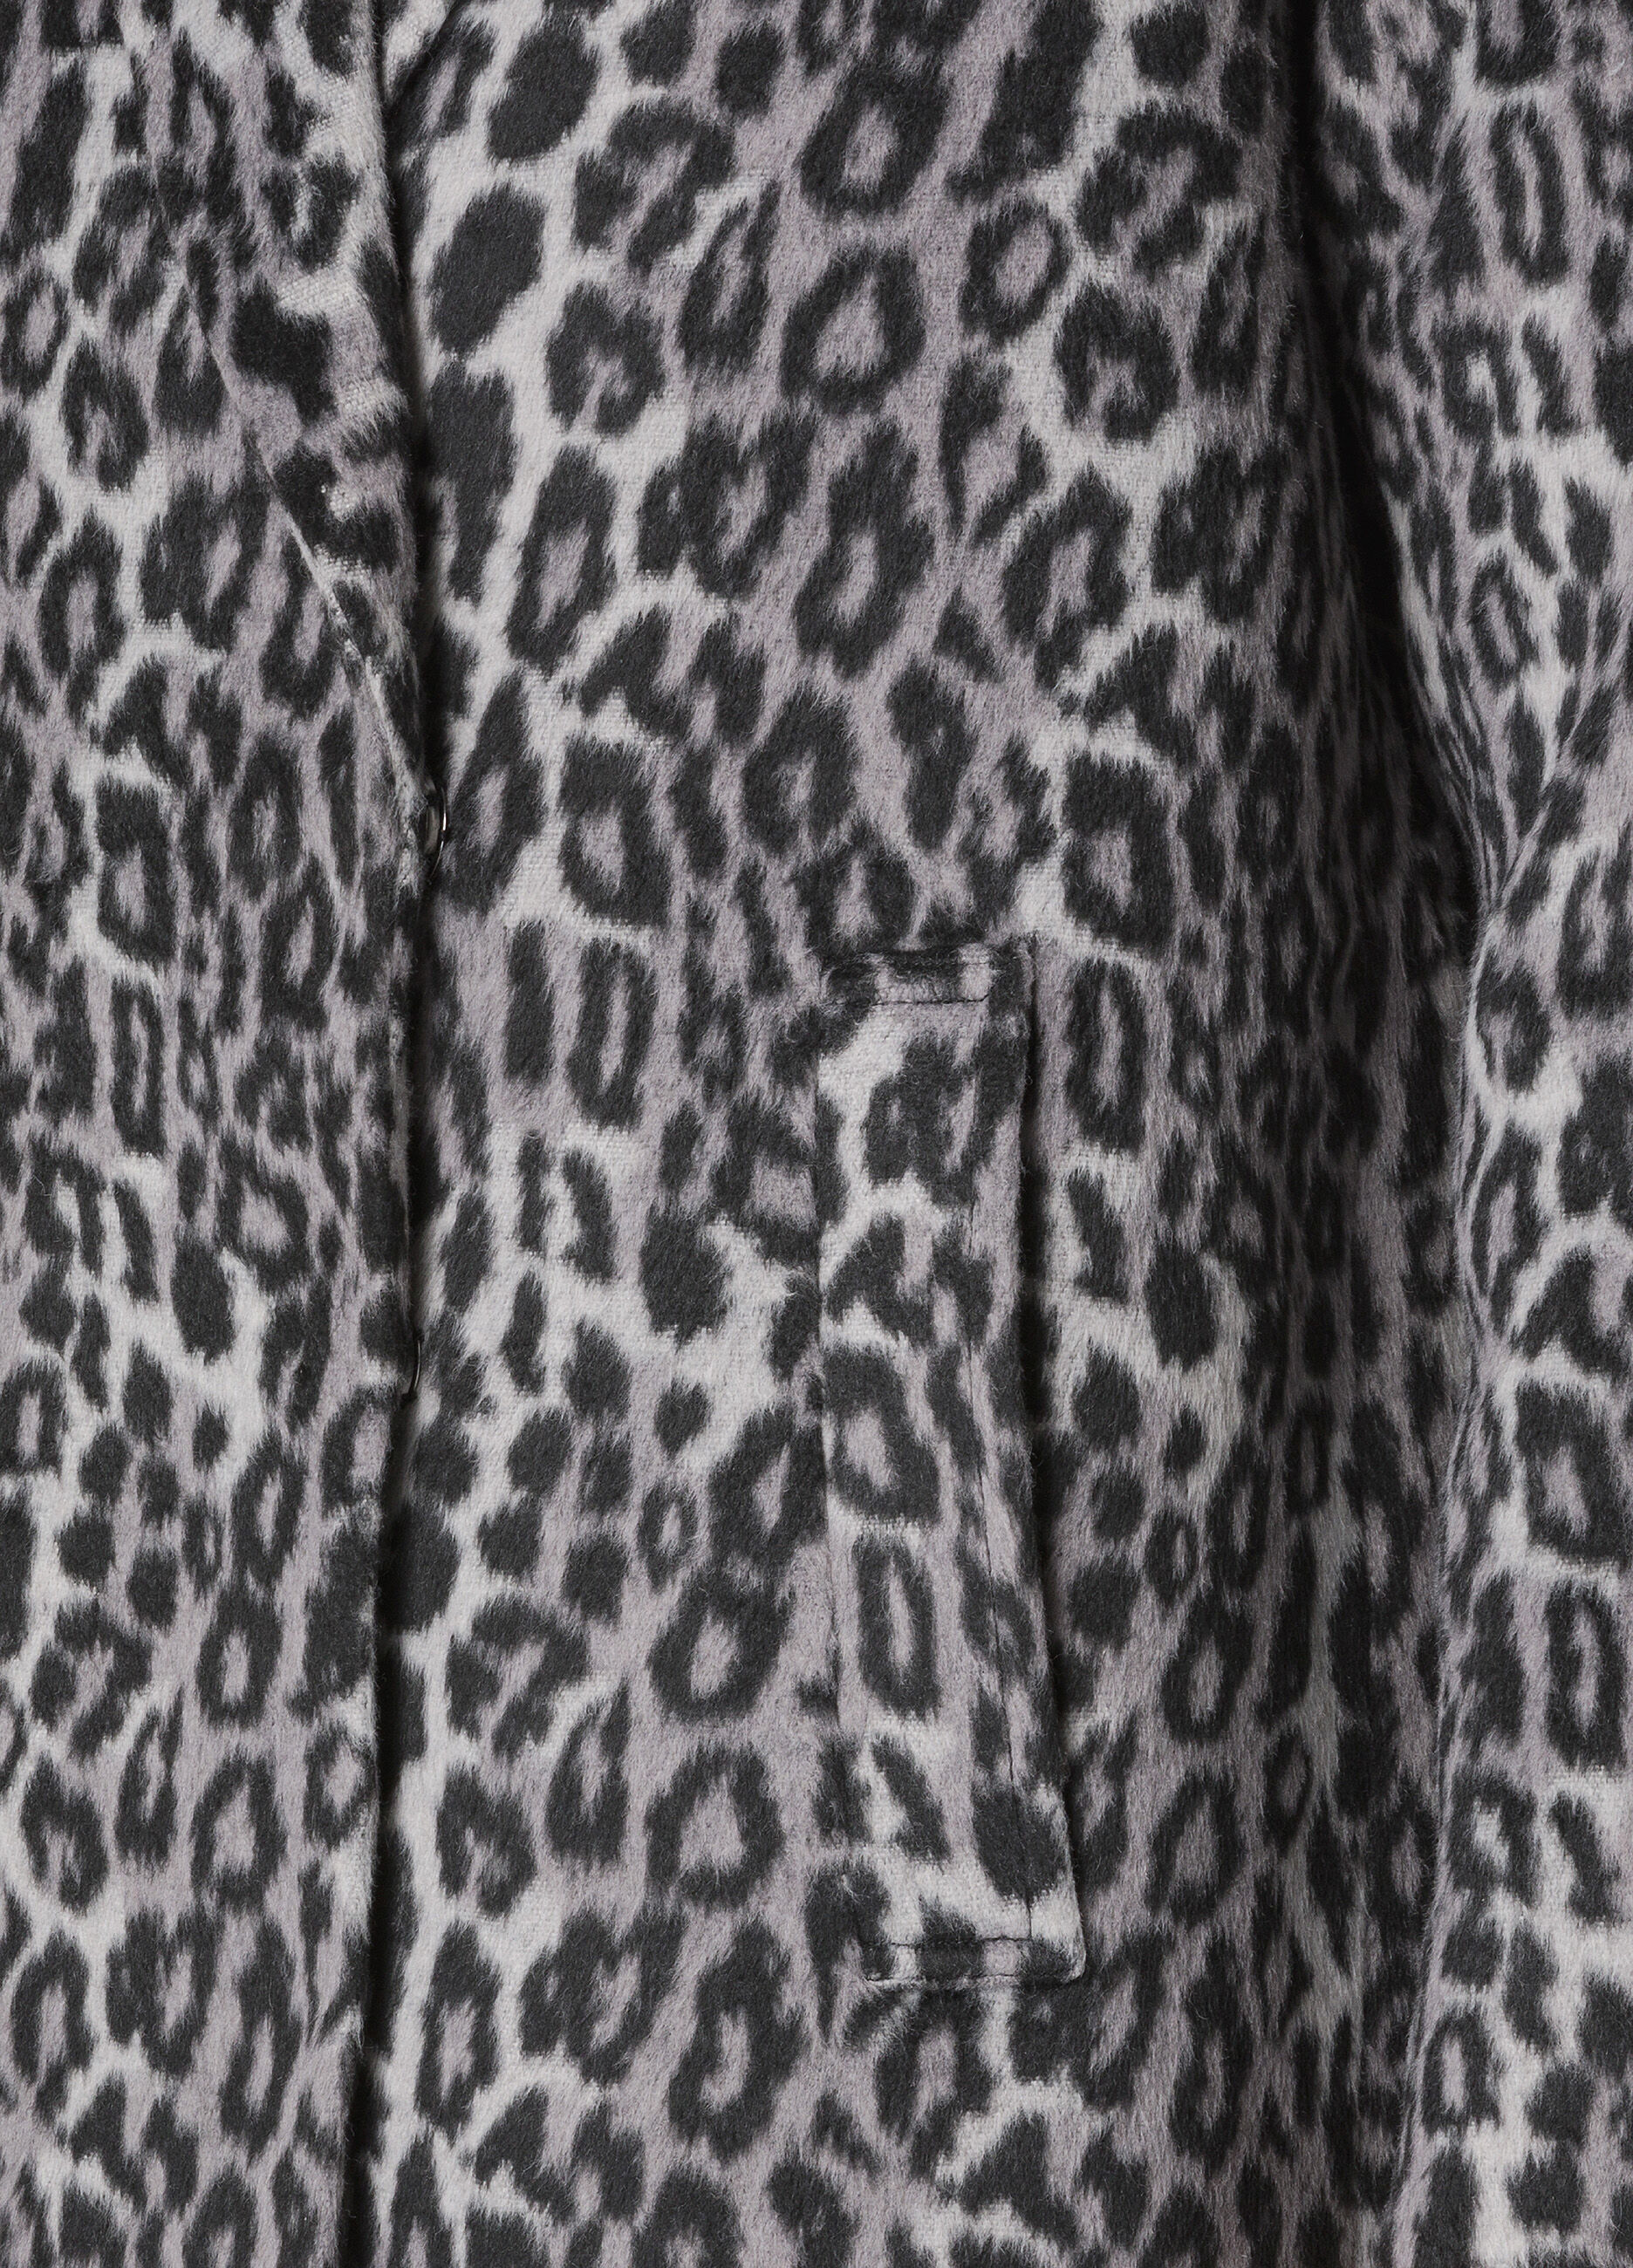 Wool blend coat with animal print